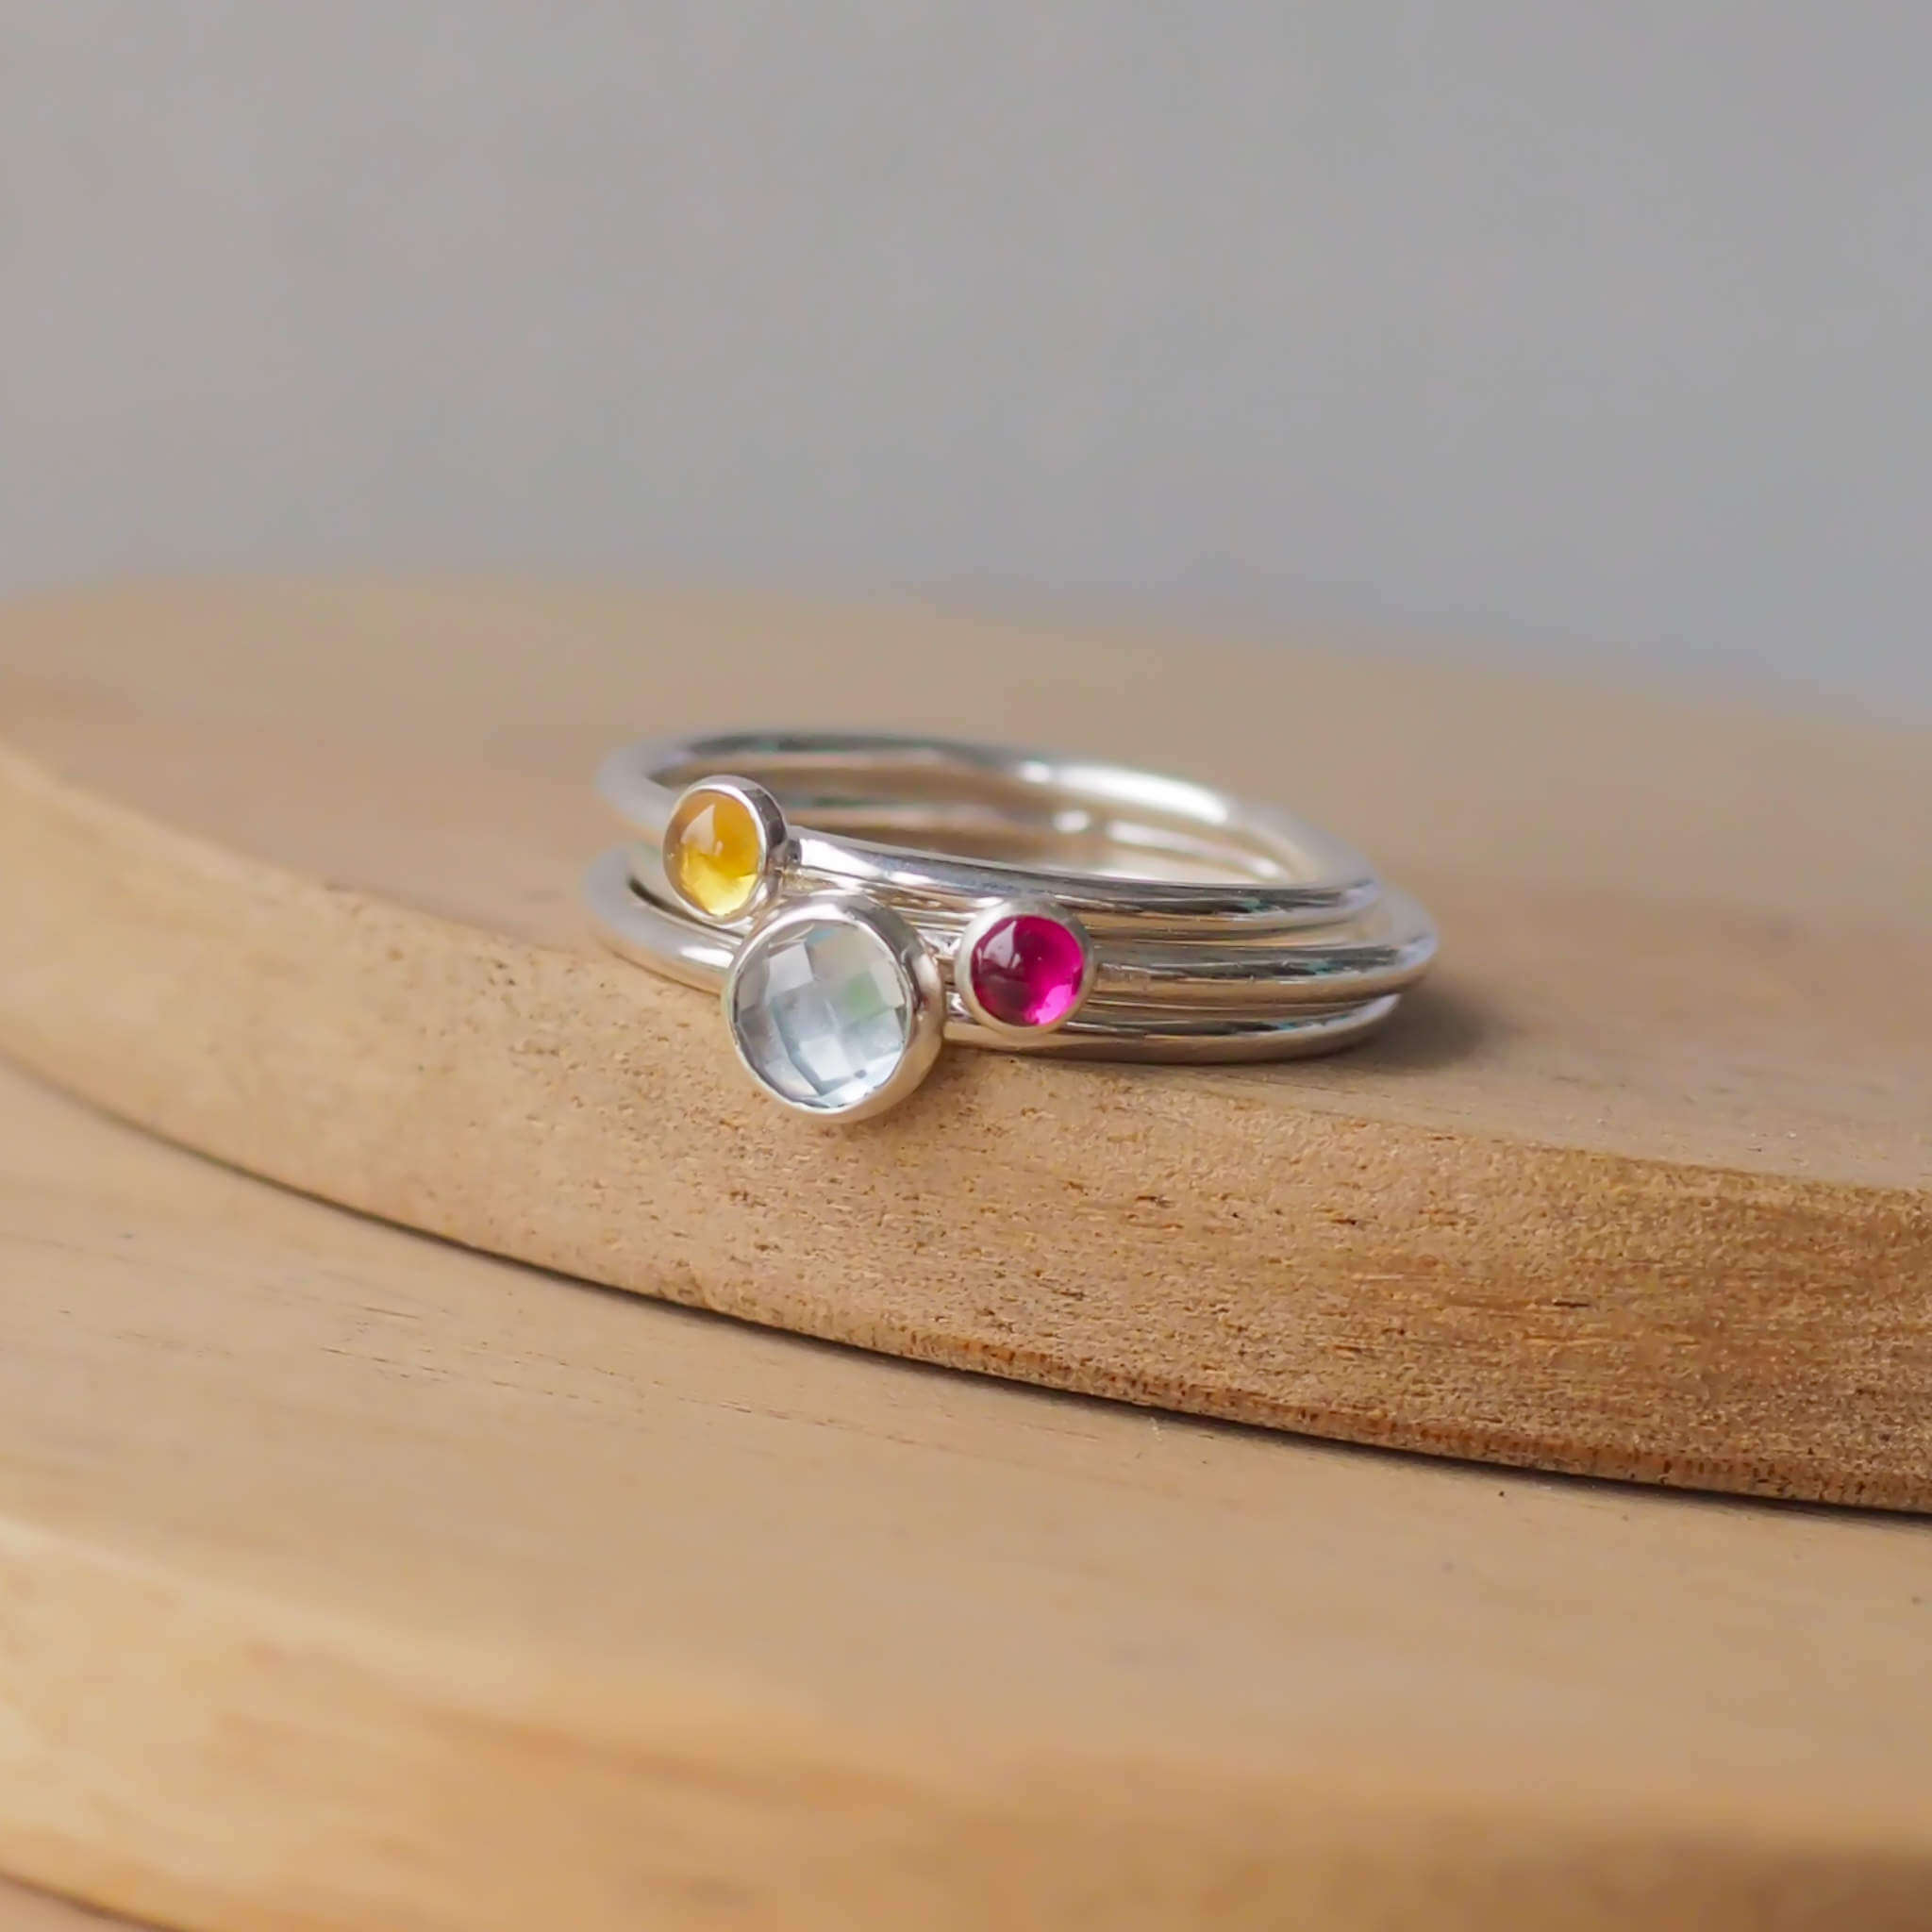 Three Birthstone RIng set with Blue Topaz, Citrine and Lab Ruby to mark March, November and July Birthdays. The three rings are made with Sterling Silver and a 5mm blue round cabochon, with two further rings with 3mm round gems in a Red Pink Lab Ruby and yellow citrine. Handmade in Scotland by maram jewellery